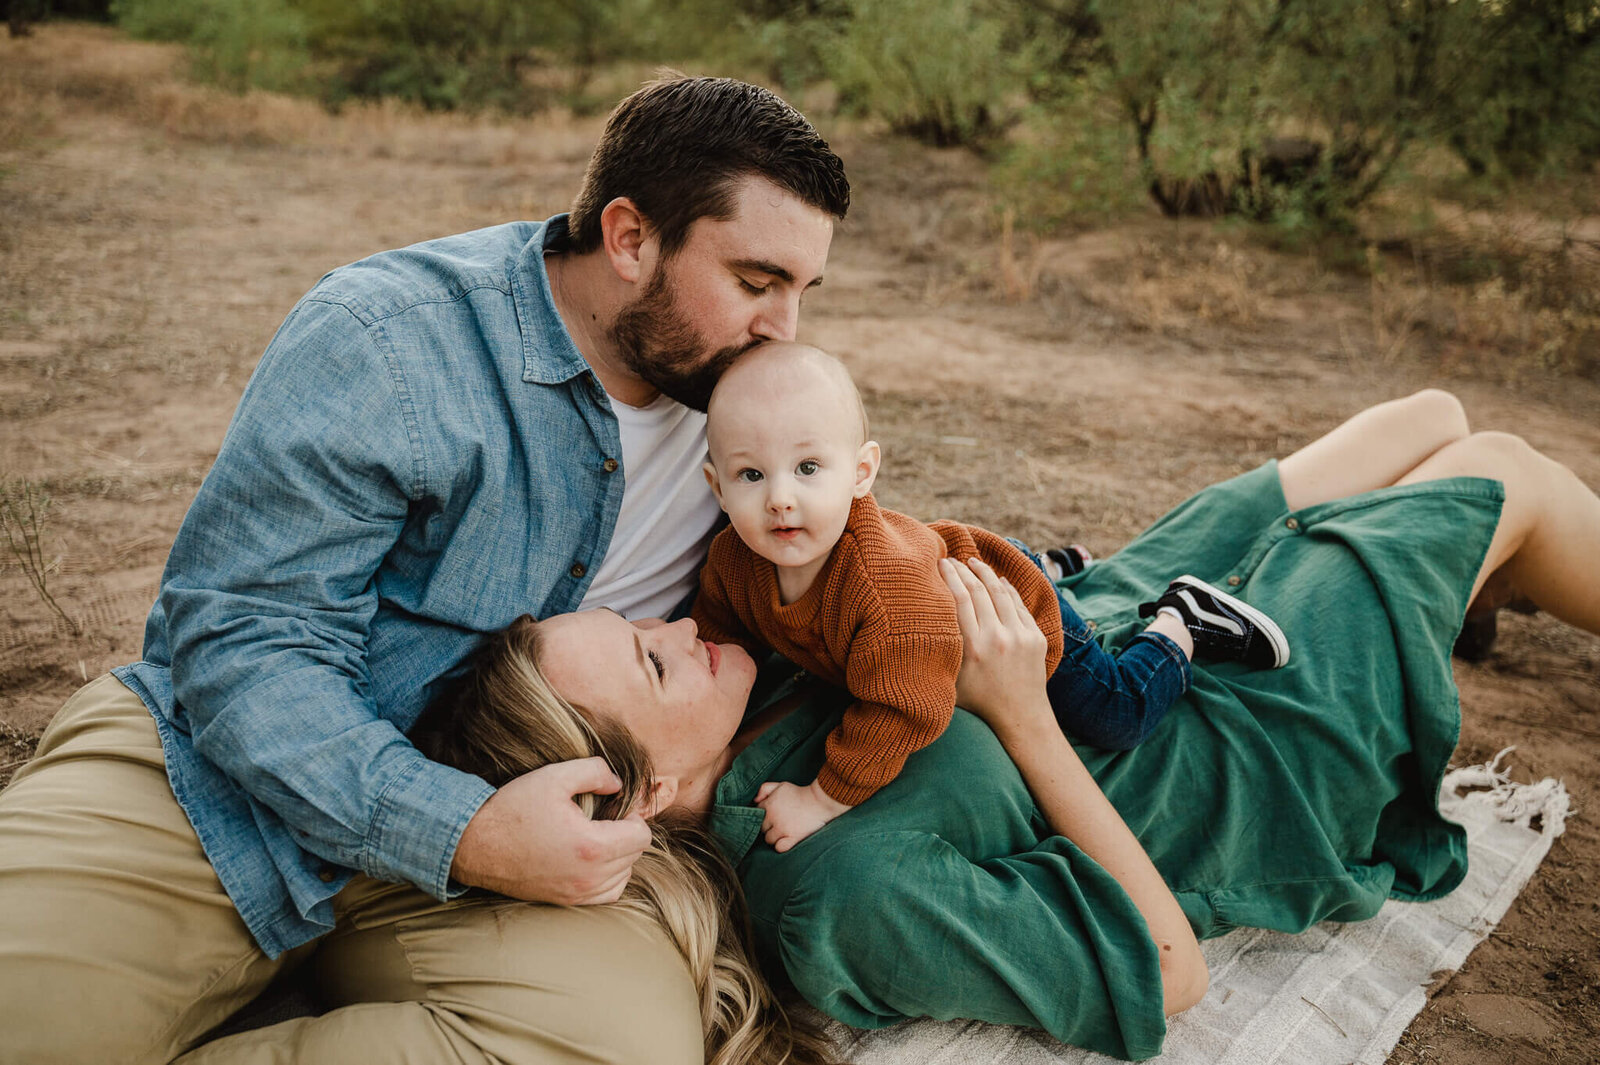 mom and dad snuggling on a throw  on a trail with their 1 year old son  amongst desert trees